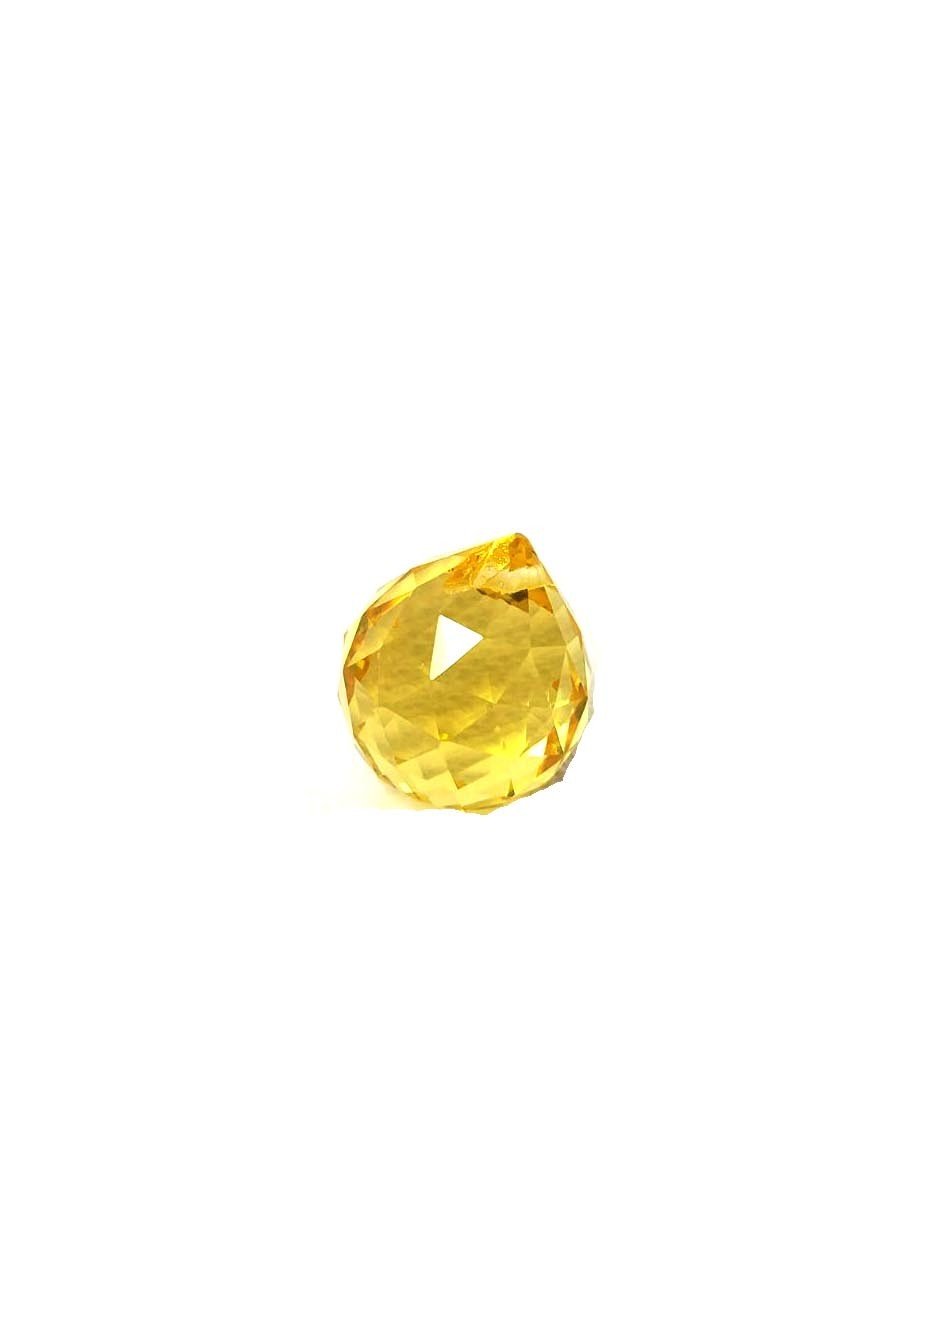 Faceted Yellow Crystal Feng Shui Ball